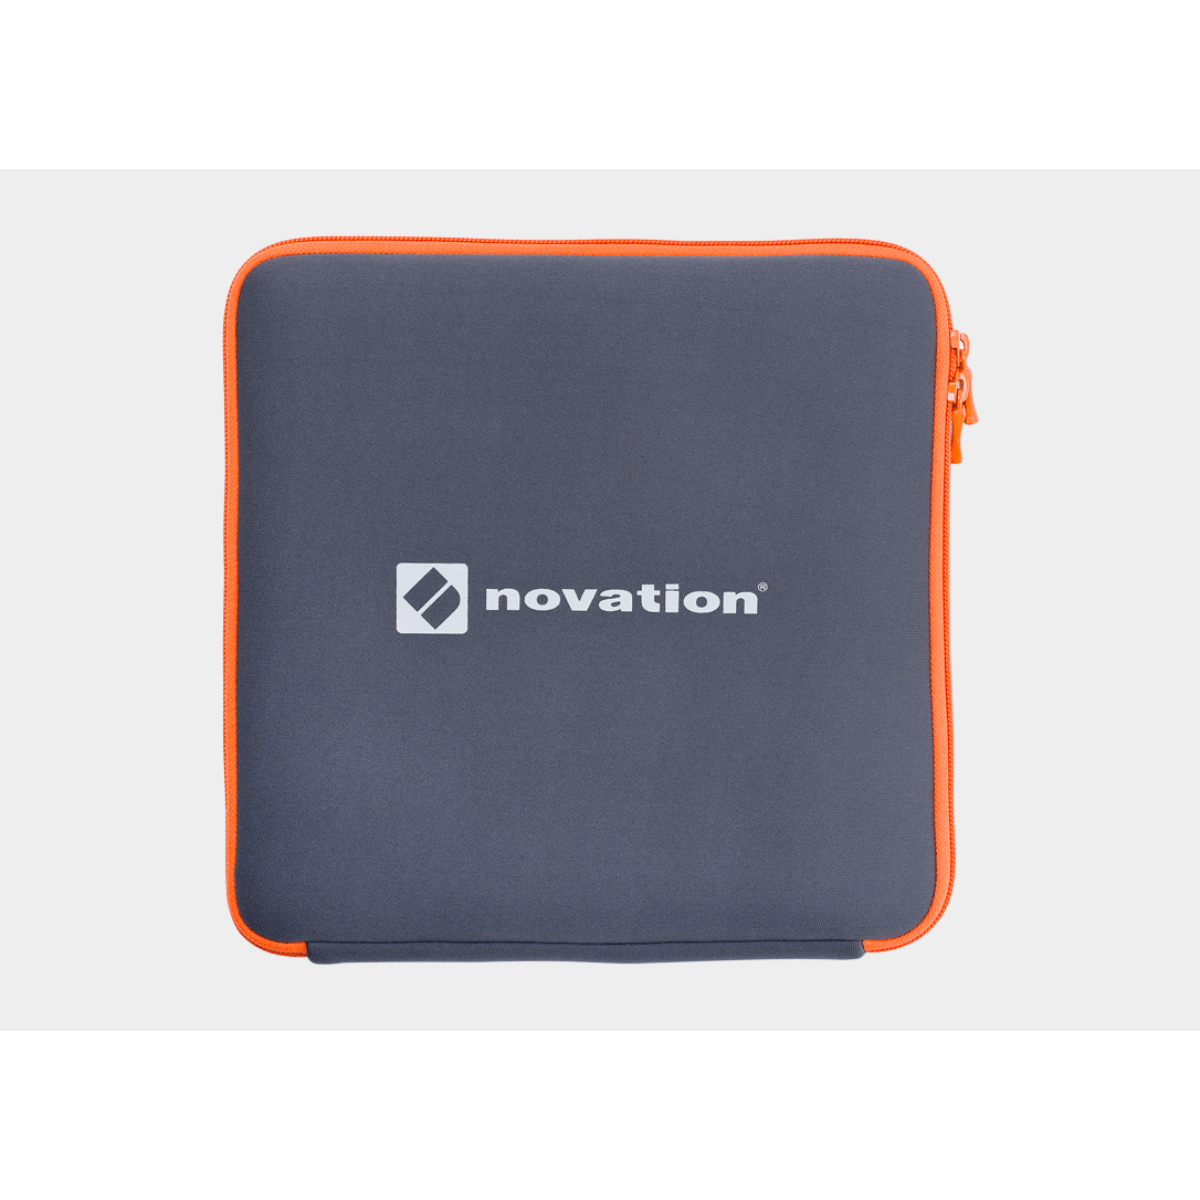 Novation Launchpad S and Launch Control XL Neoprene Sleeve